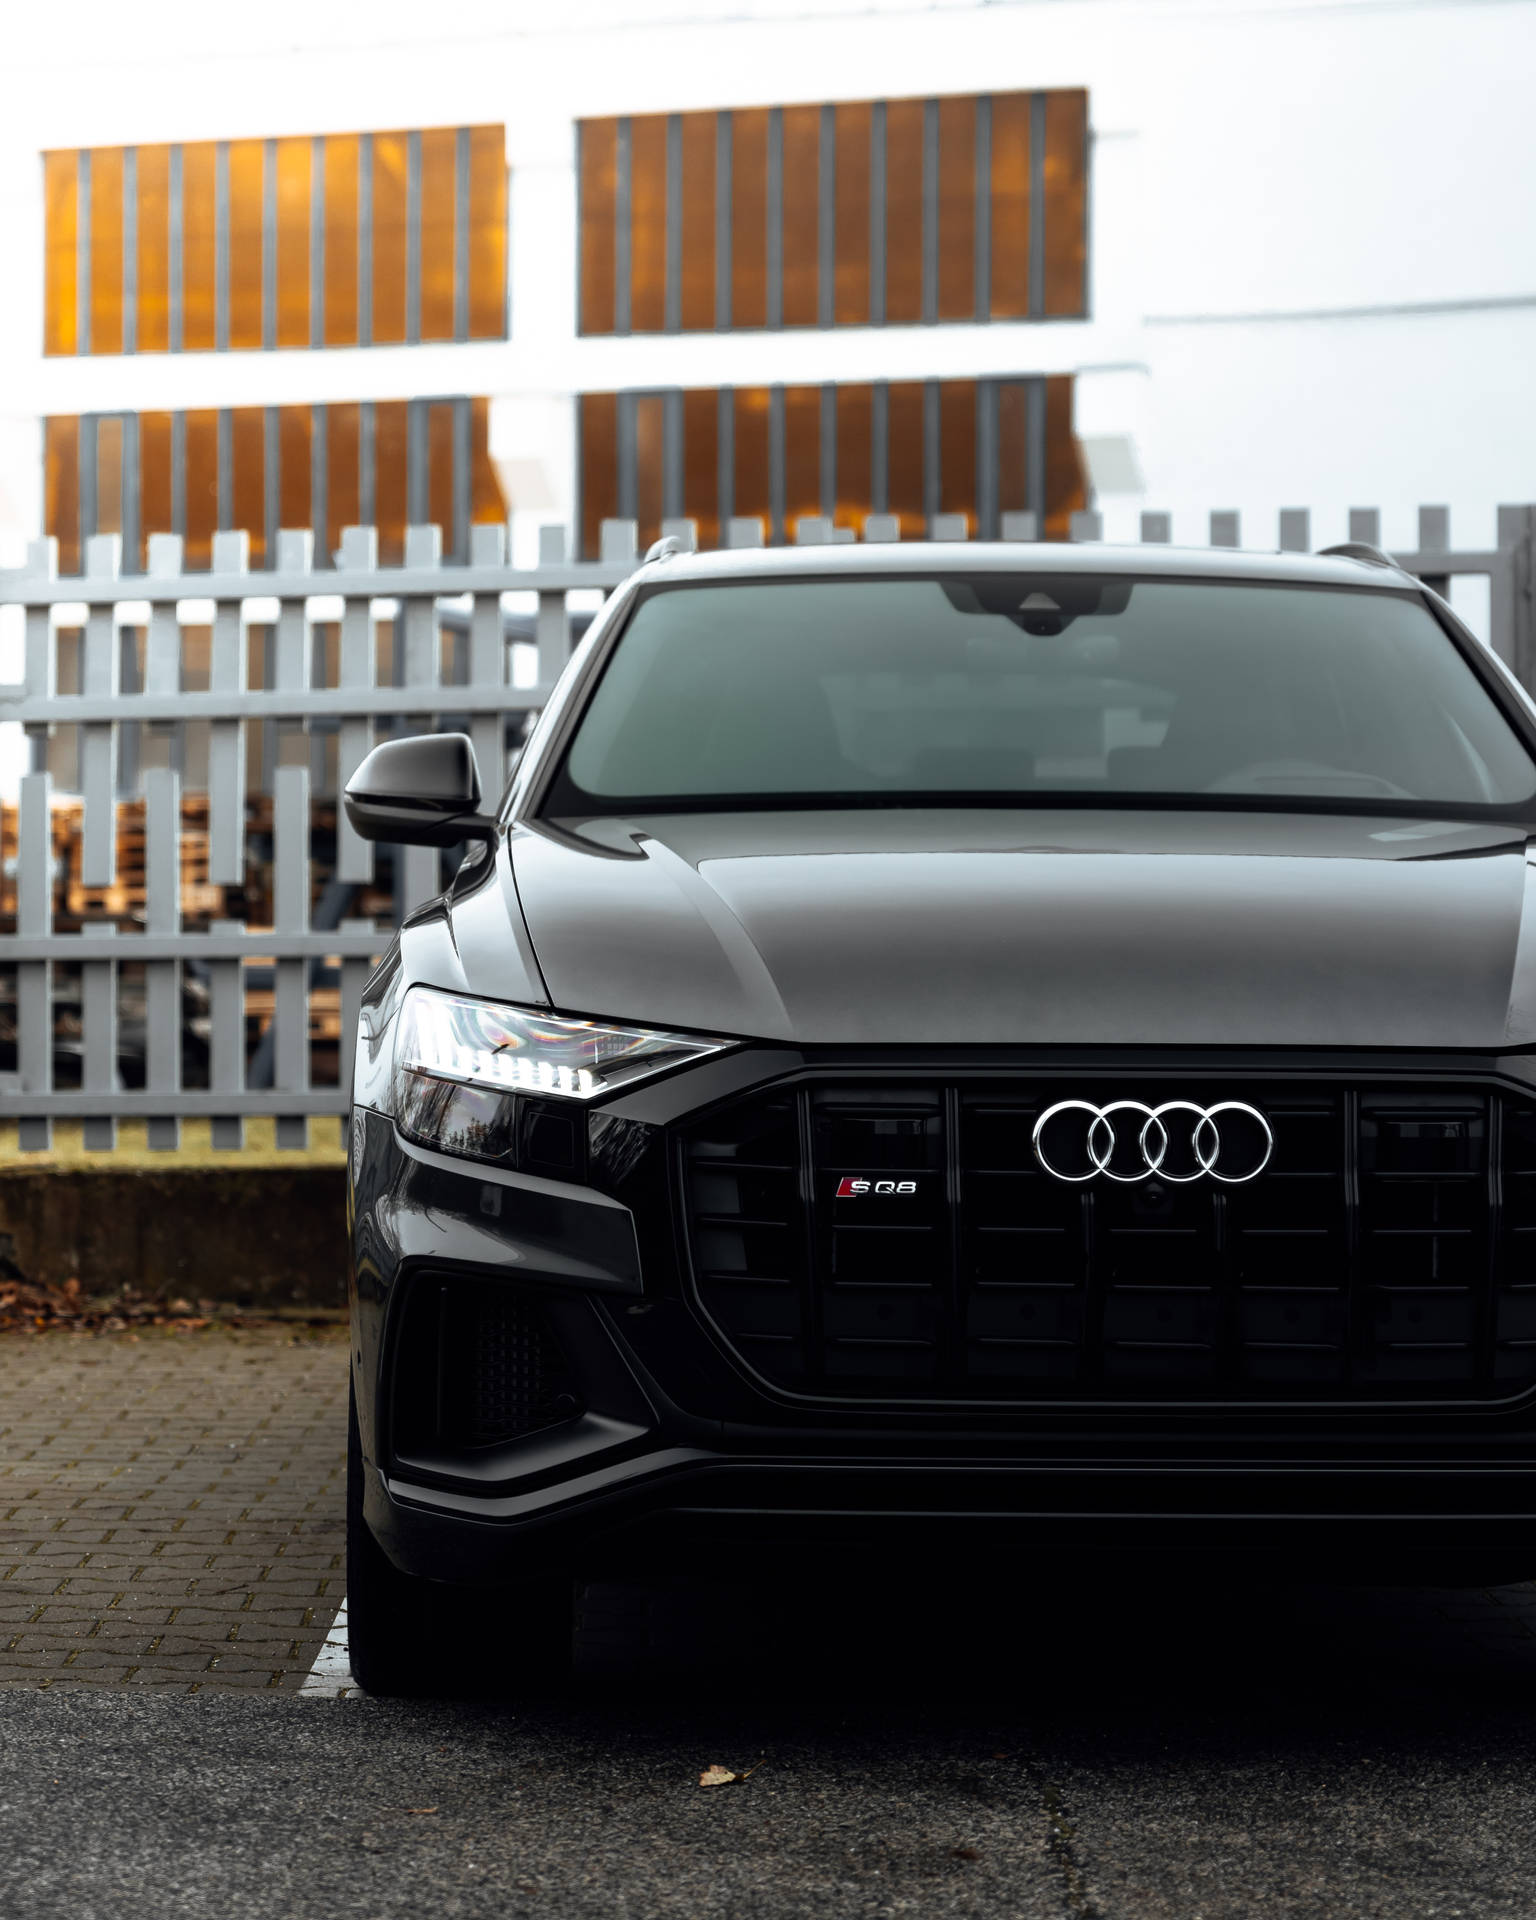 3886X4858 Audi Wallpaper and Background